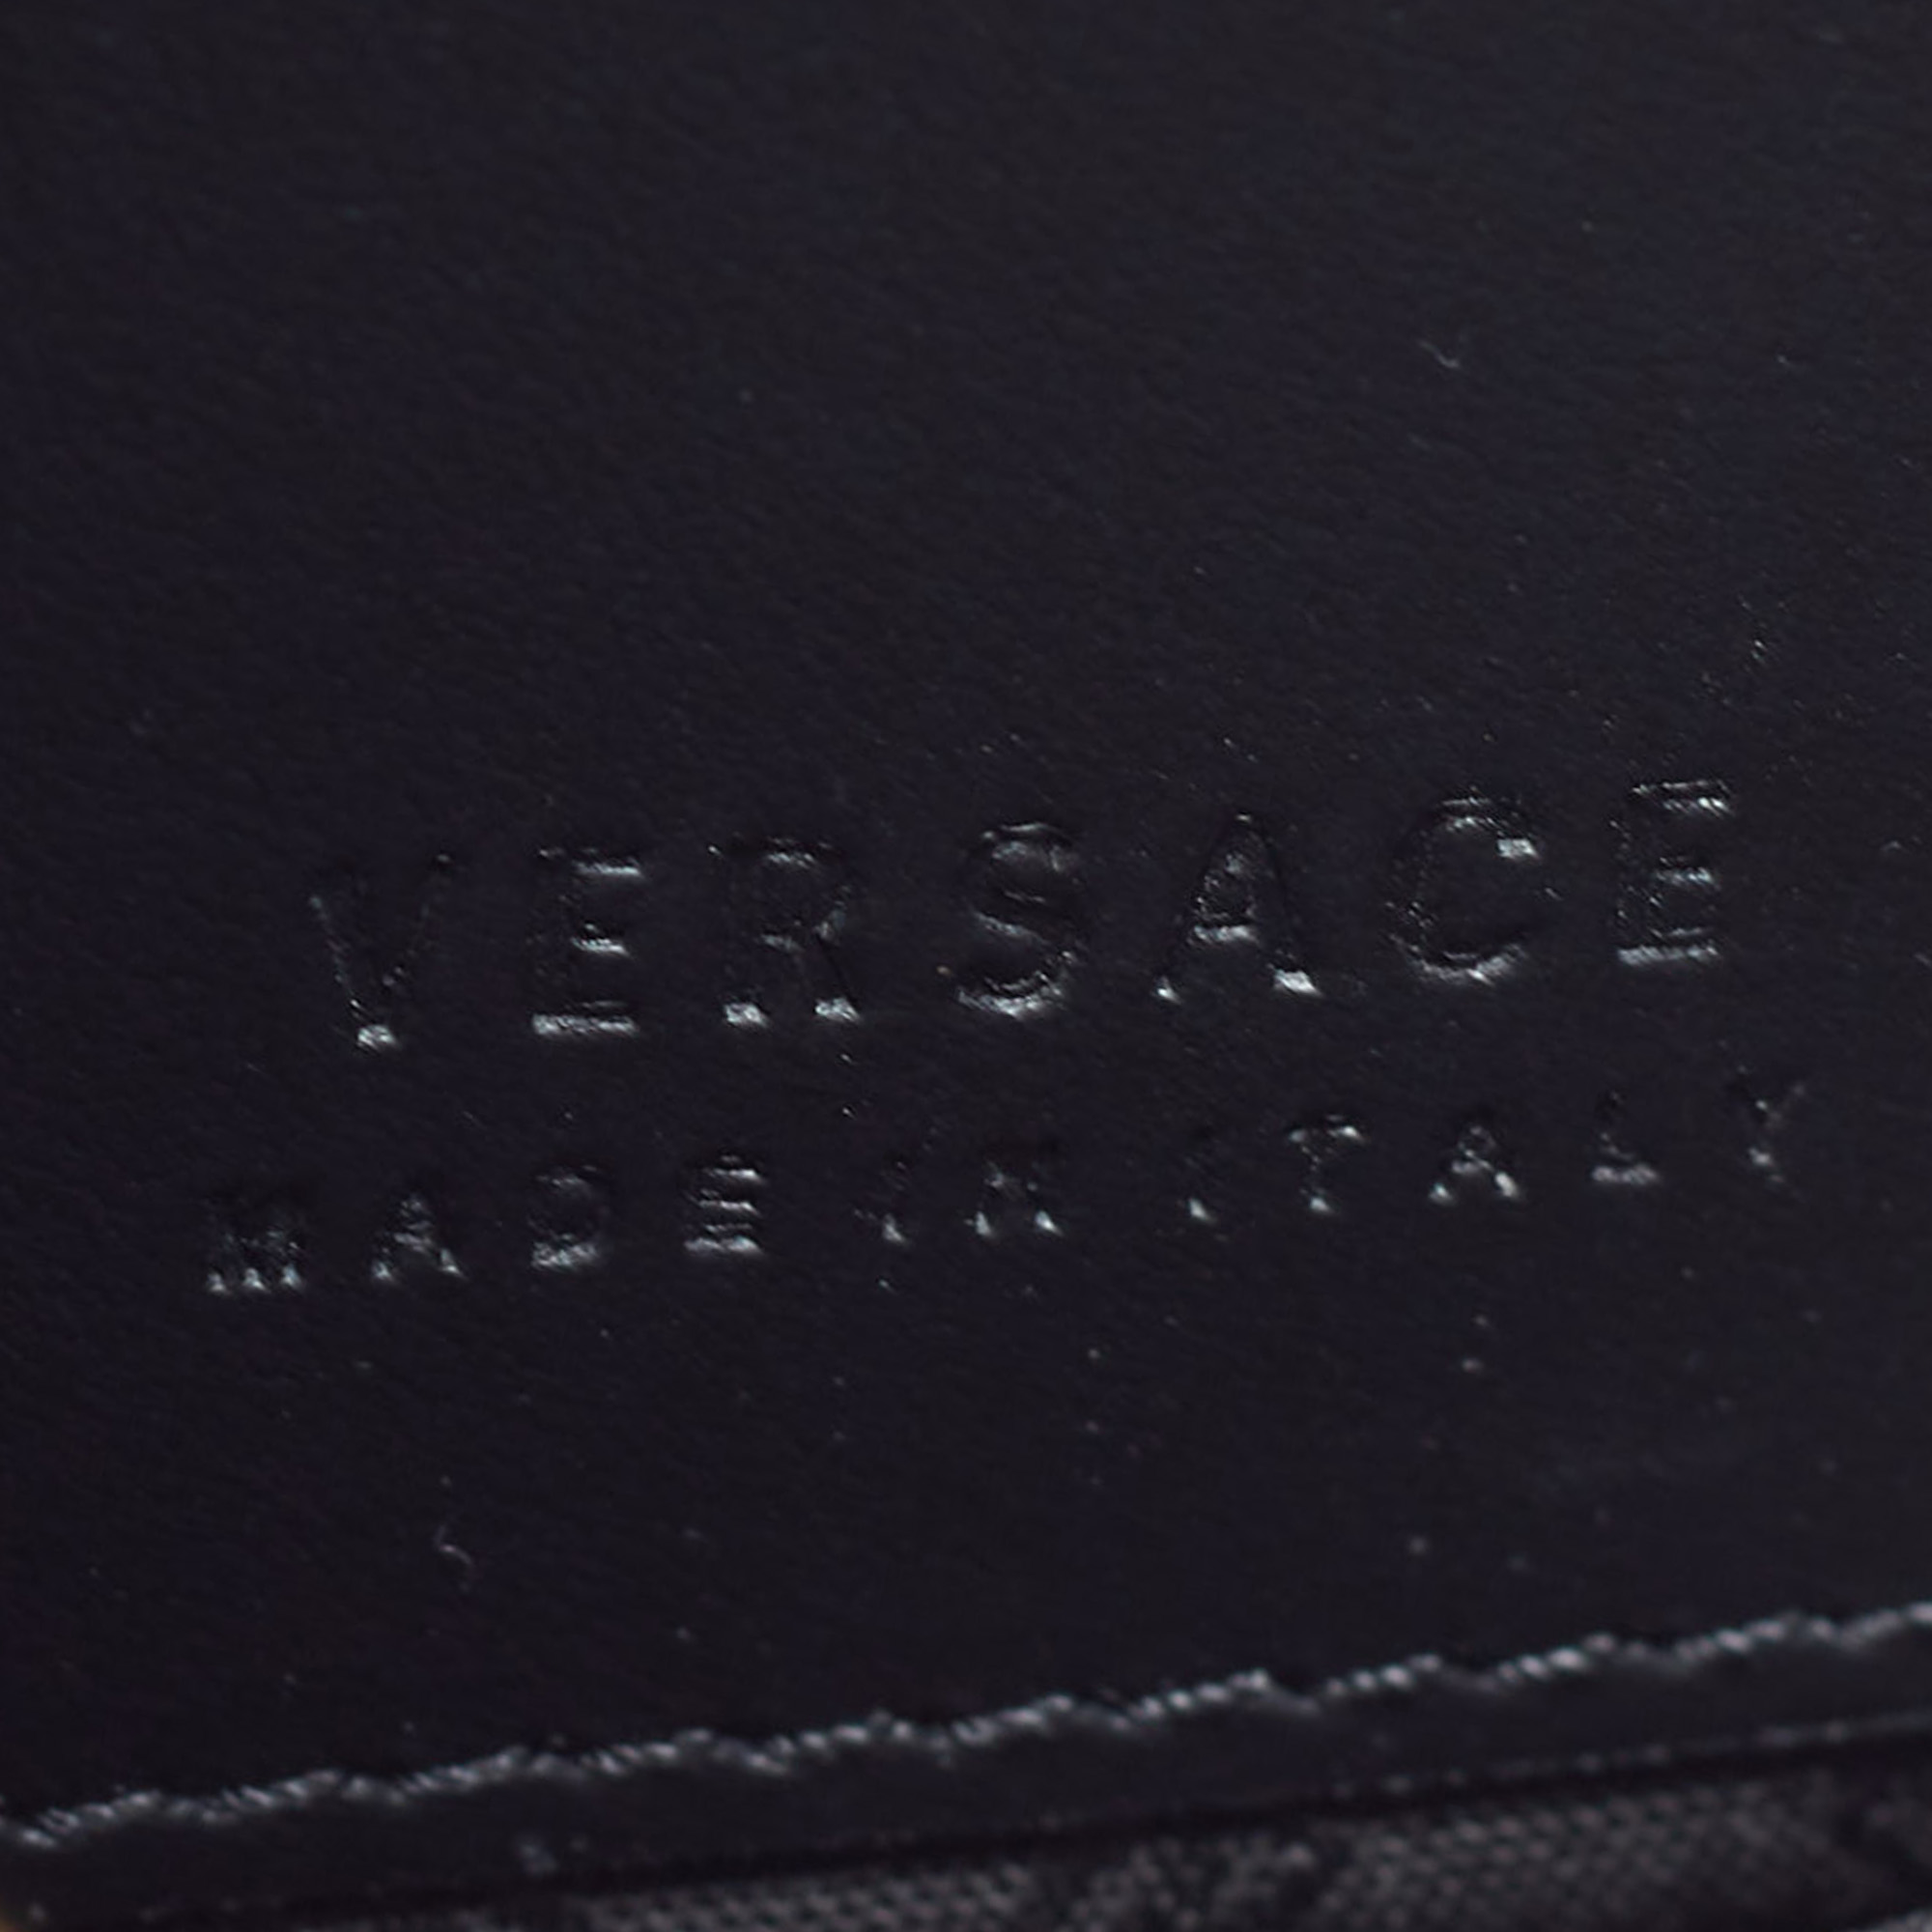 Versace Black Leather Number Plate Wristlet Pouch